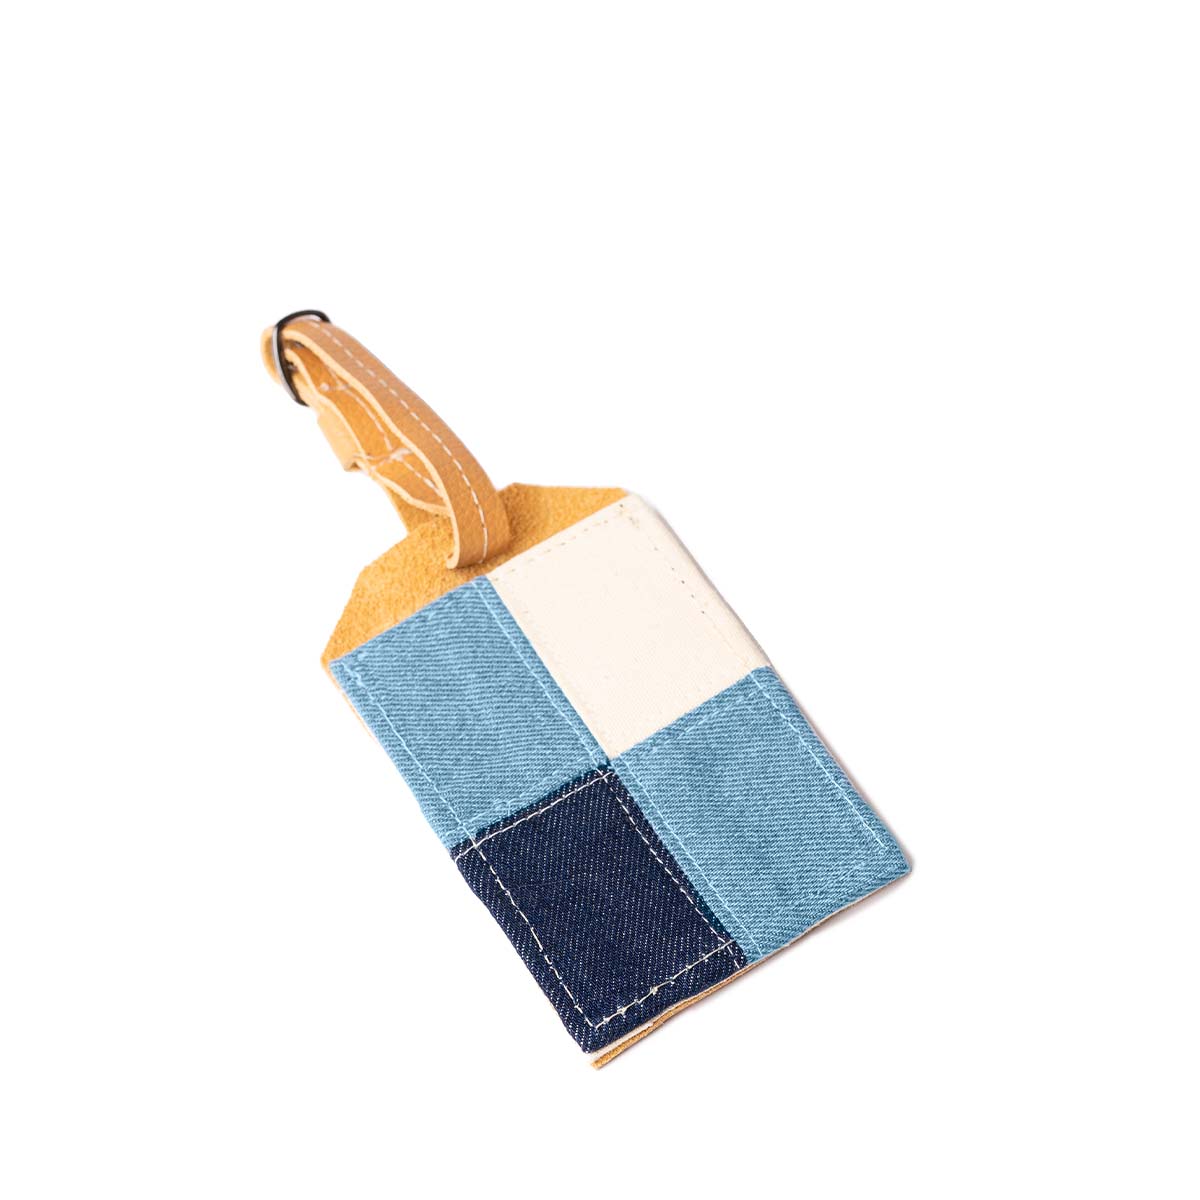 The back of the Ines Luggage Tag in 90s Denim. It has four squares, one in dark blue, two in light blue, and one in white. It has a leather adjustable strap.